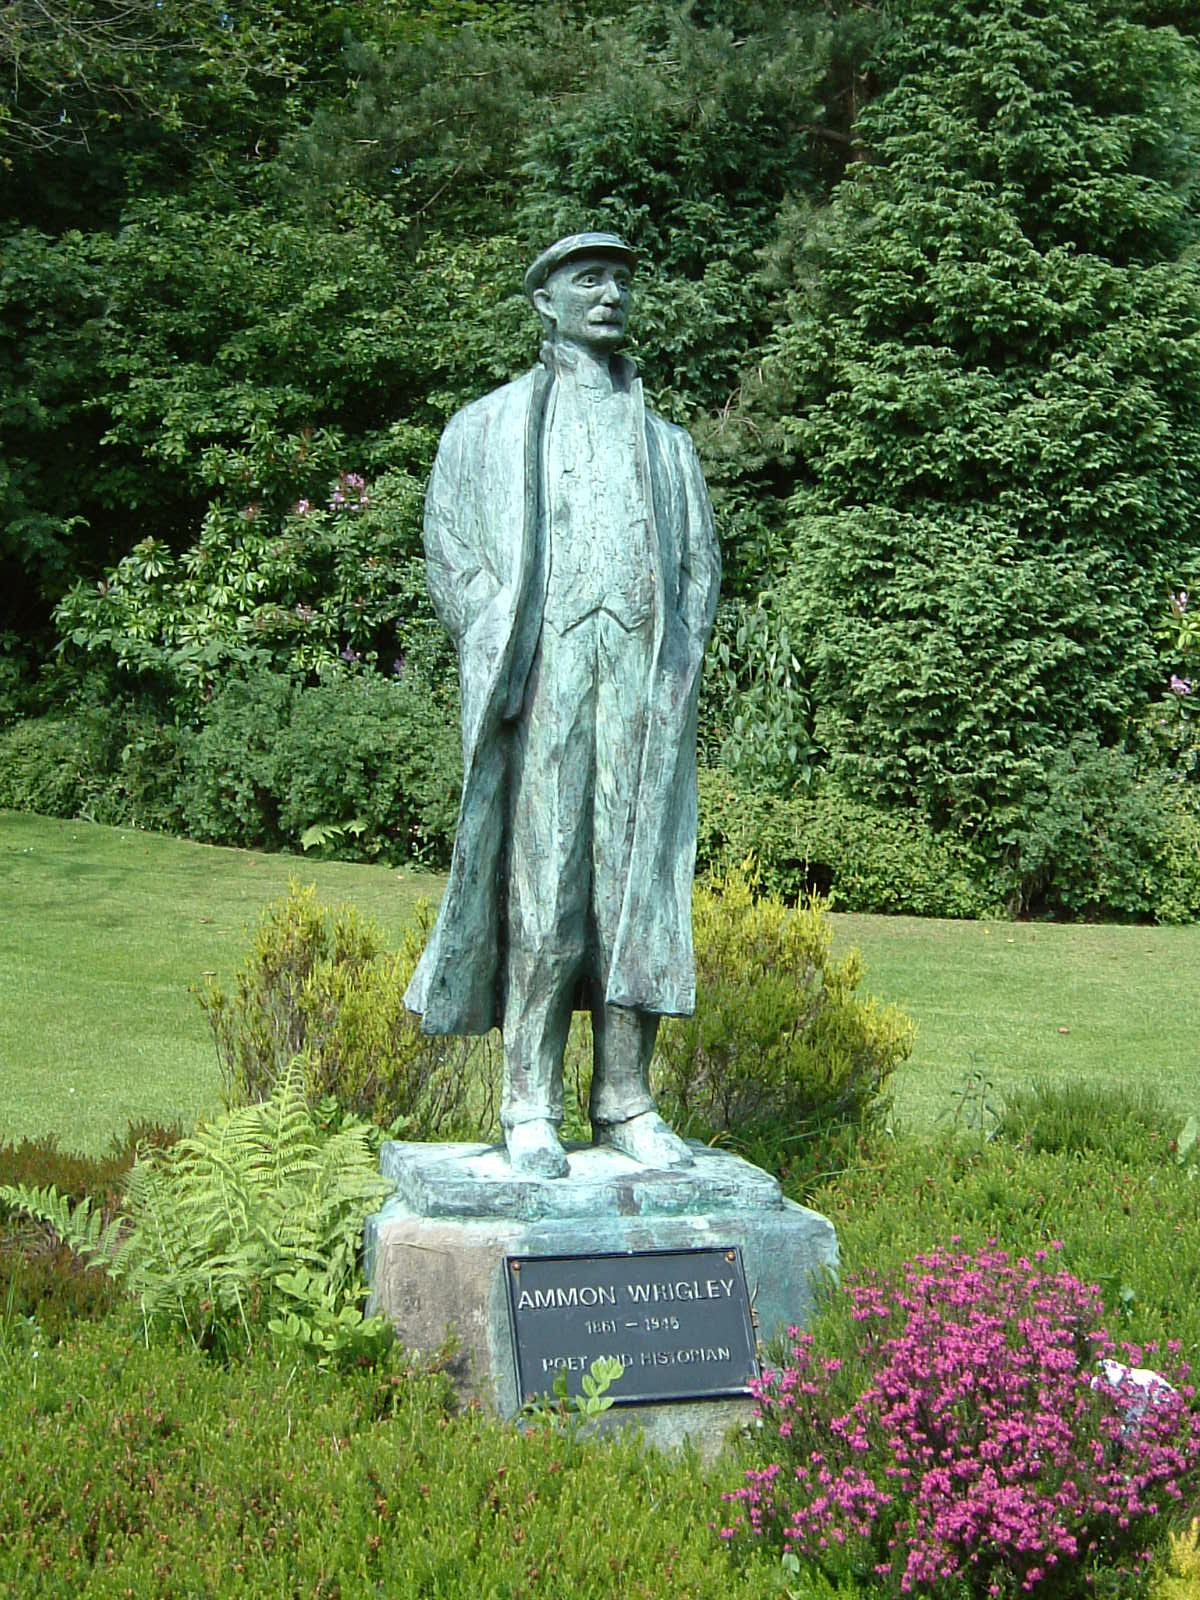 A statue of Ammon Wrigley